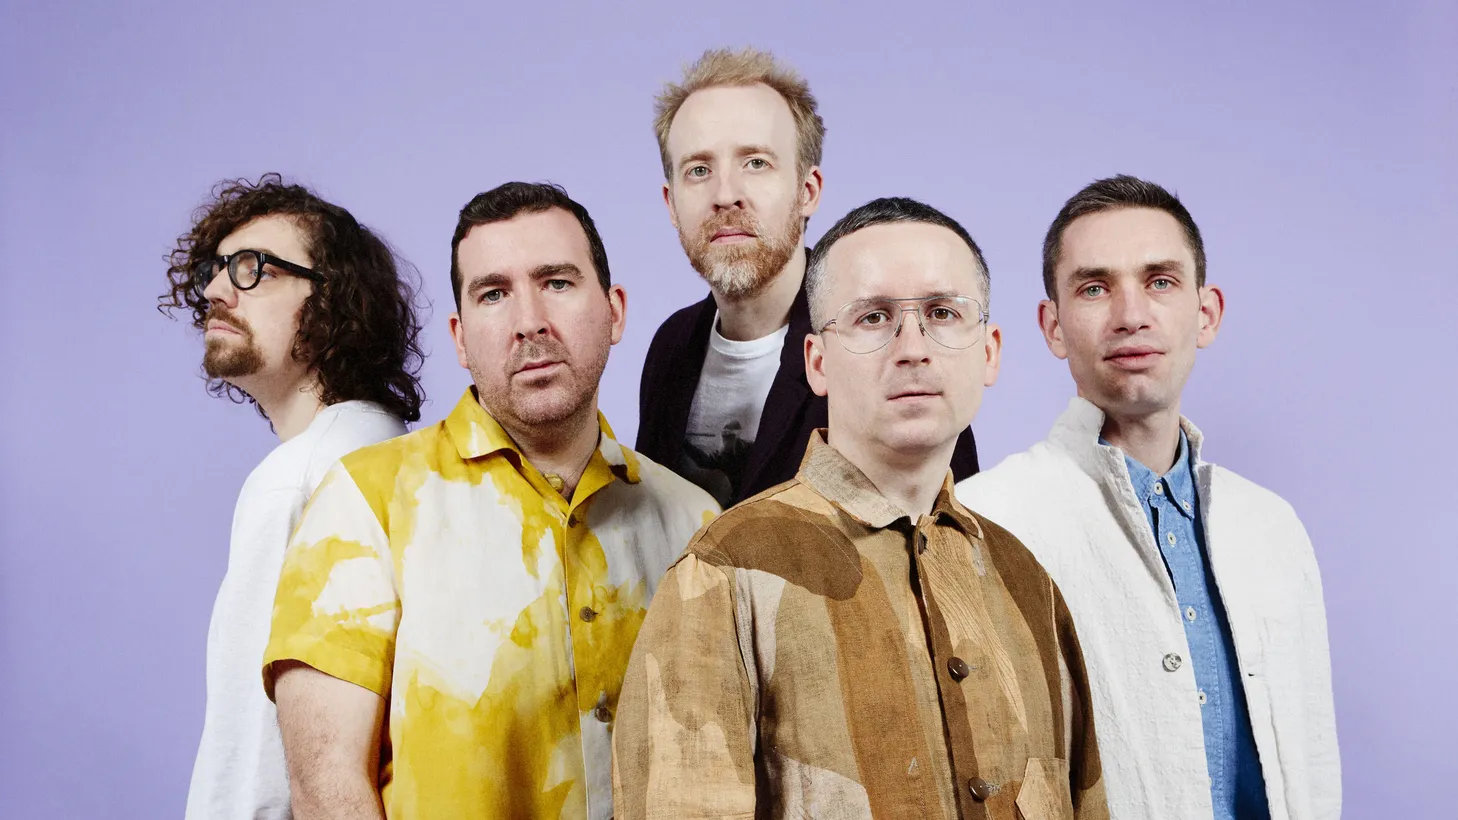 On their seventh studio album A Bath Full of Ecstasy, Hot Chip take their dance floor anthems to new heights with the guidance of co-producers Philippe Zdar and Rodaidh McDonald.